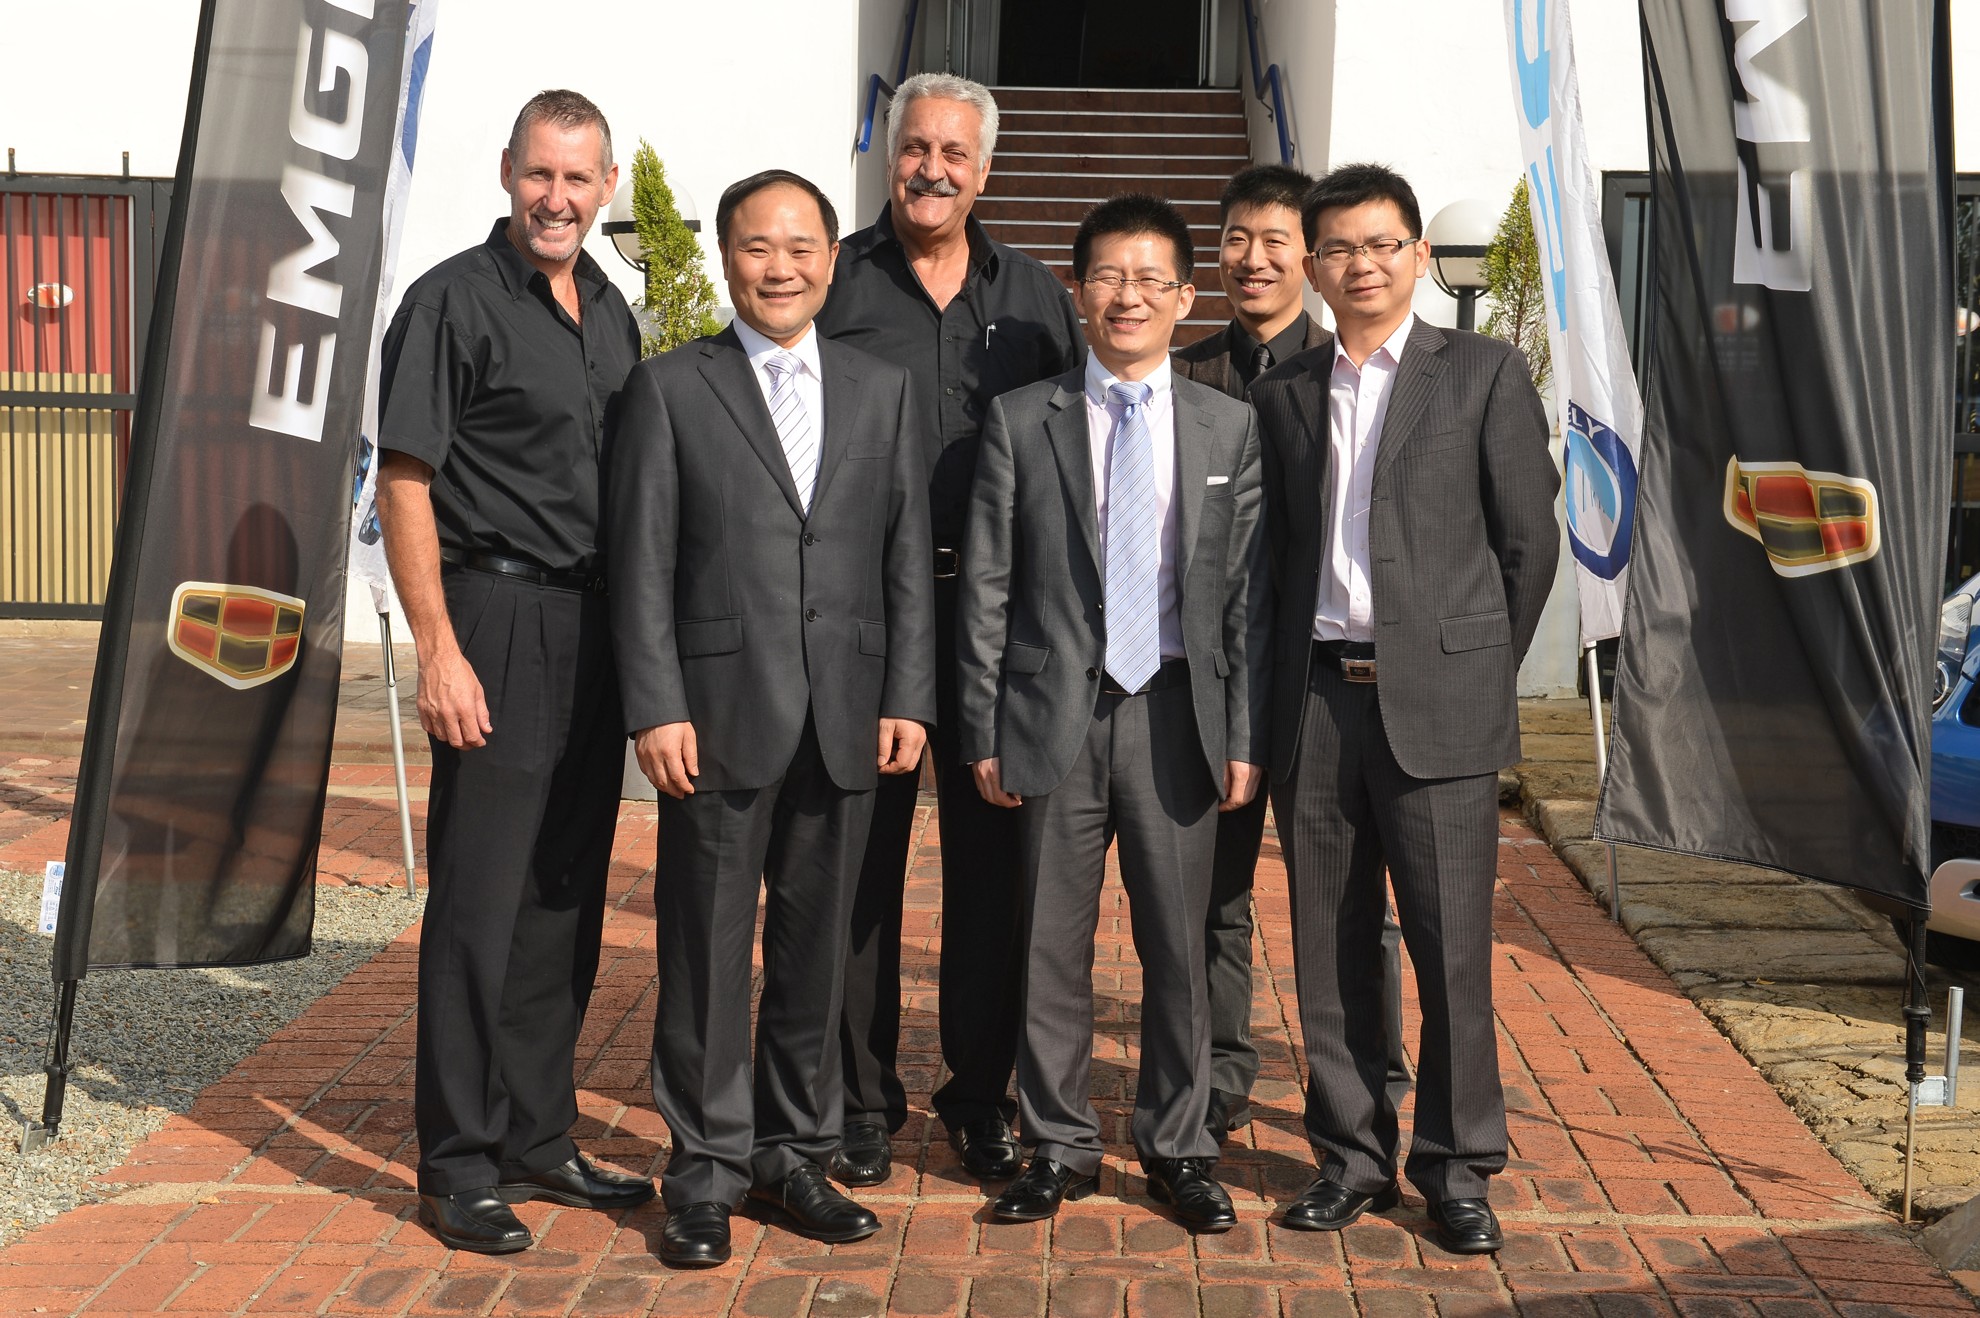 GEELY CHAIRMAN EXCITED AFTER VISIT TO SOUTH AFRICA